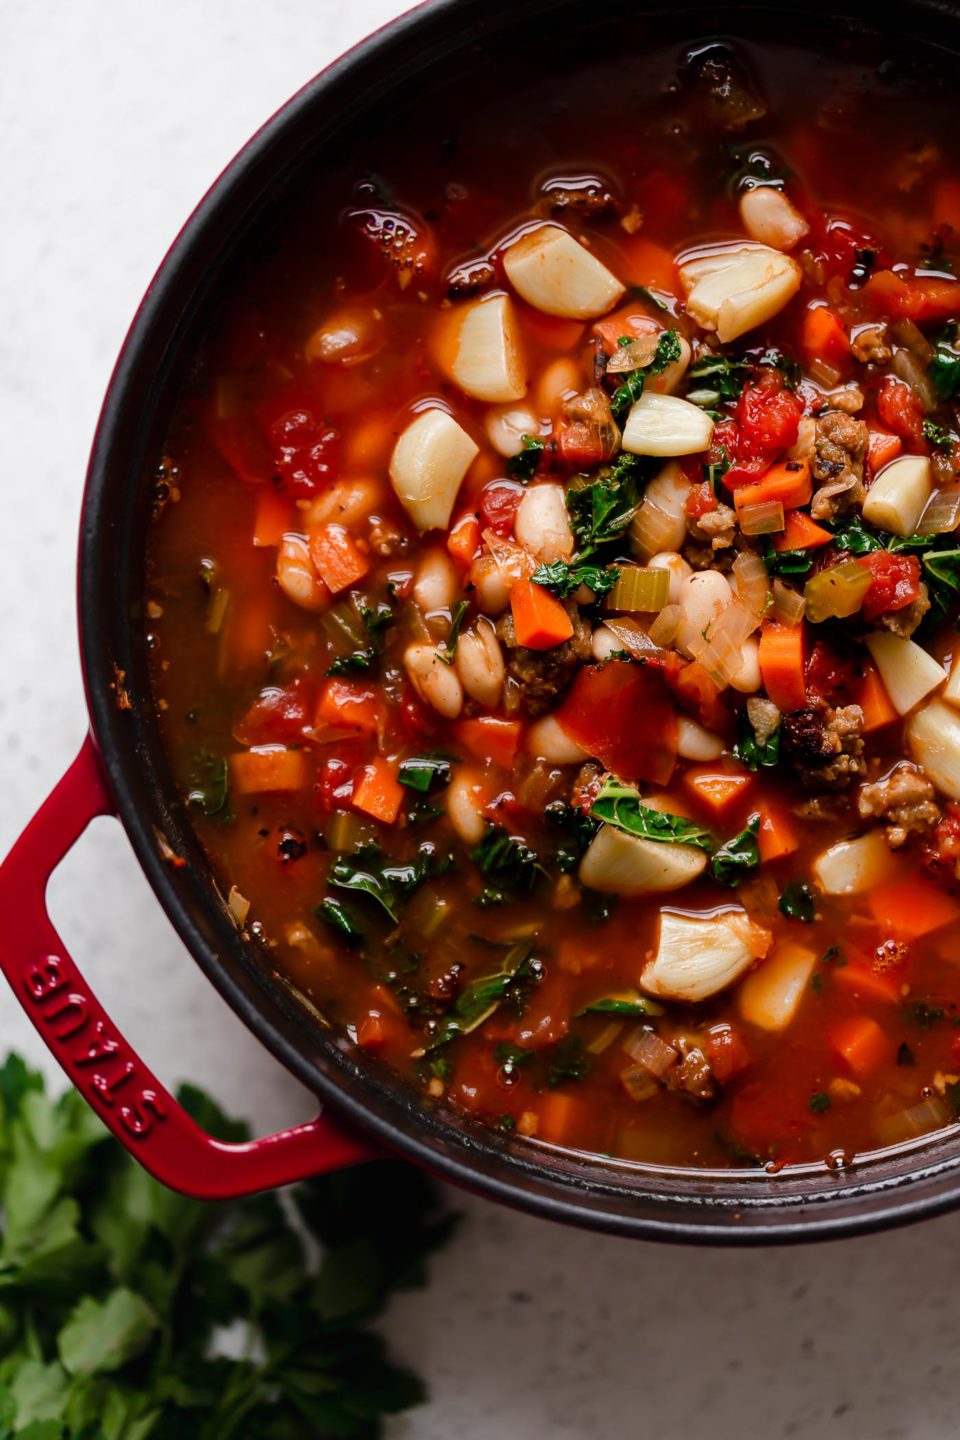 a hearty italian minestrone soup recipe, made with sausage, veggies, beans, kale, & a garlic & herb infused broth. this minestrone soup is comforting, rich, & the perfect cozy recipe to make all winter long. the ultimate minestrone soup! #playswellwithbutter #minestronesoup #heartysouprecipes #heartymeals #souprecipes #comfortfood #comfortfooddinners #soup #italianrecipes #italiansoup